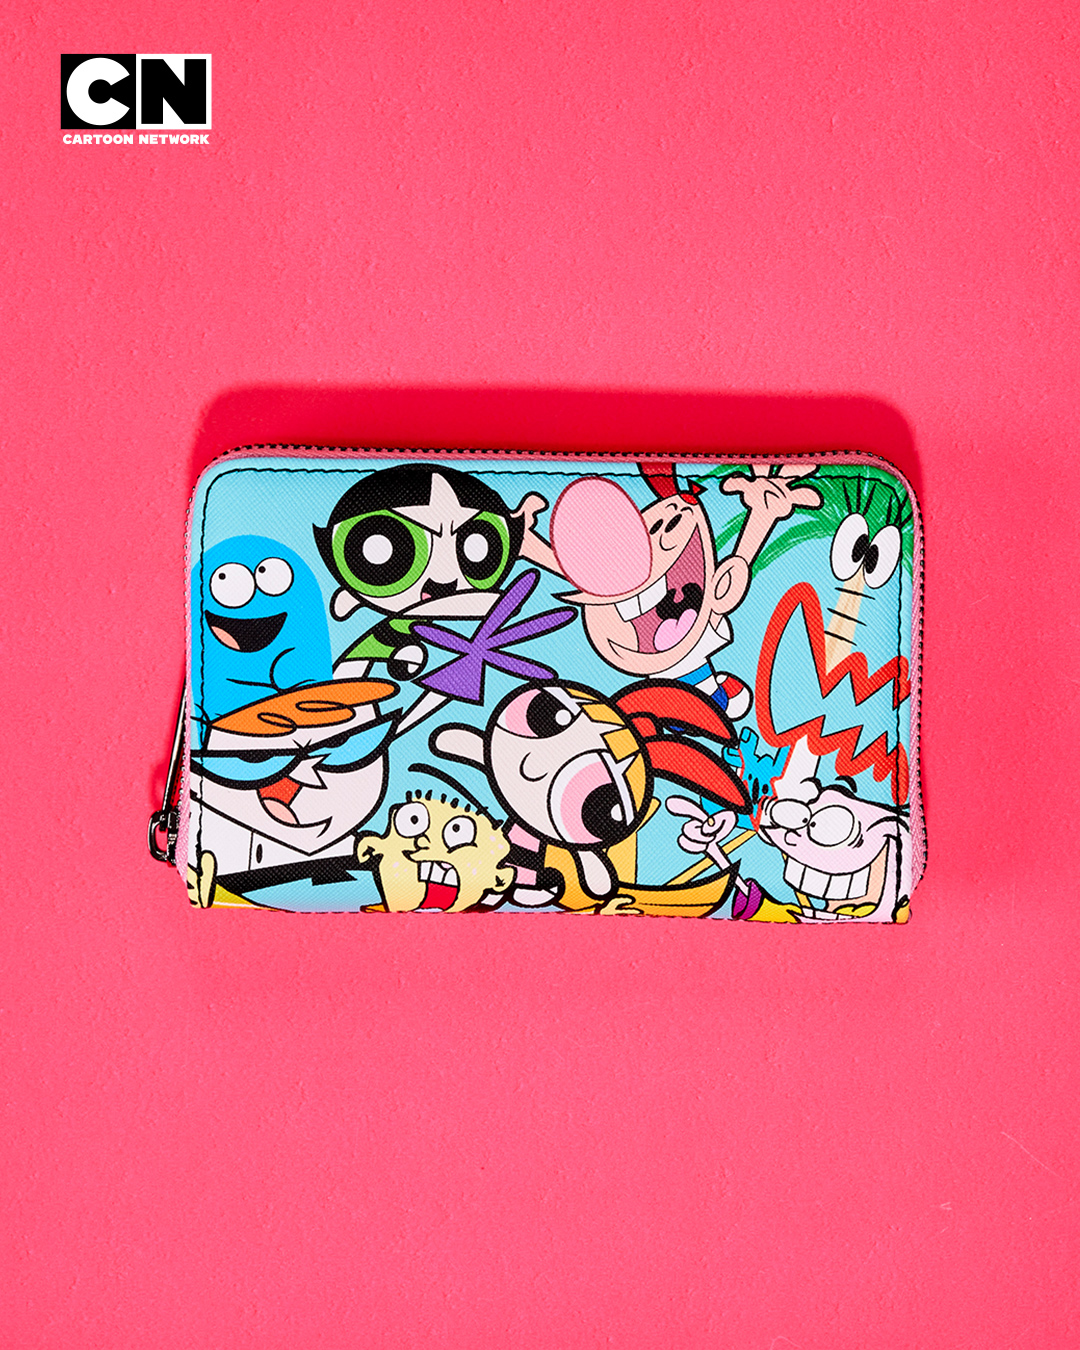 Cartoon Network on X: The official merchandise for